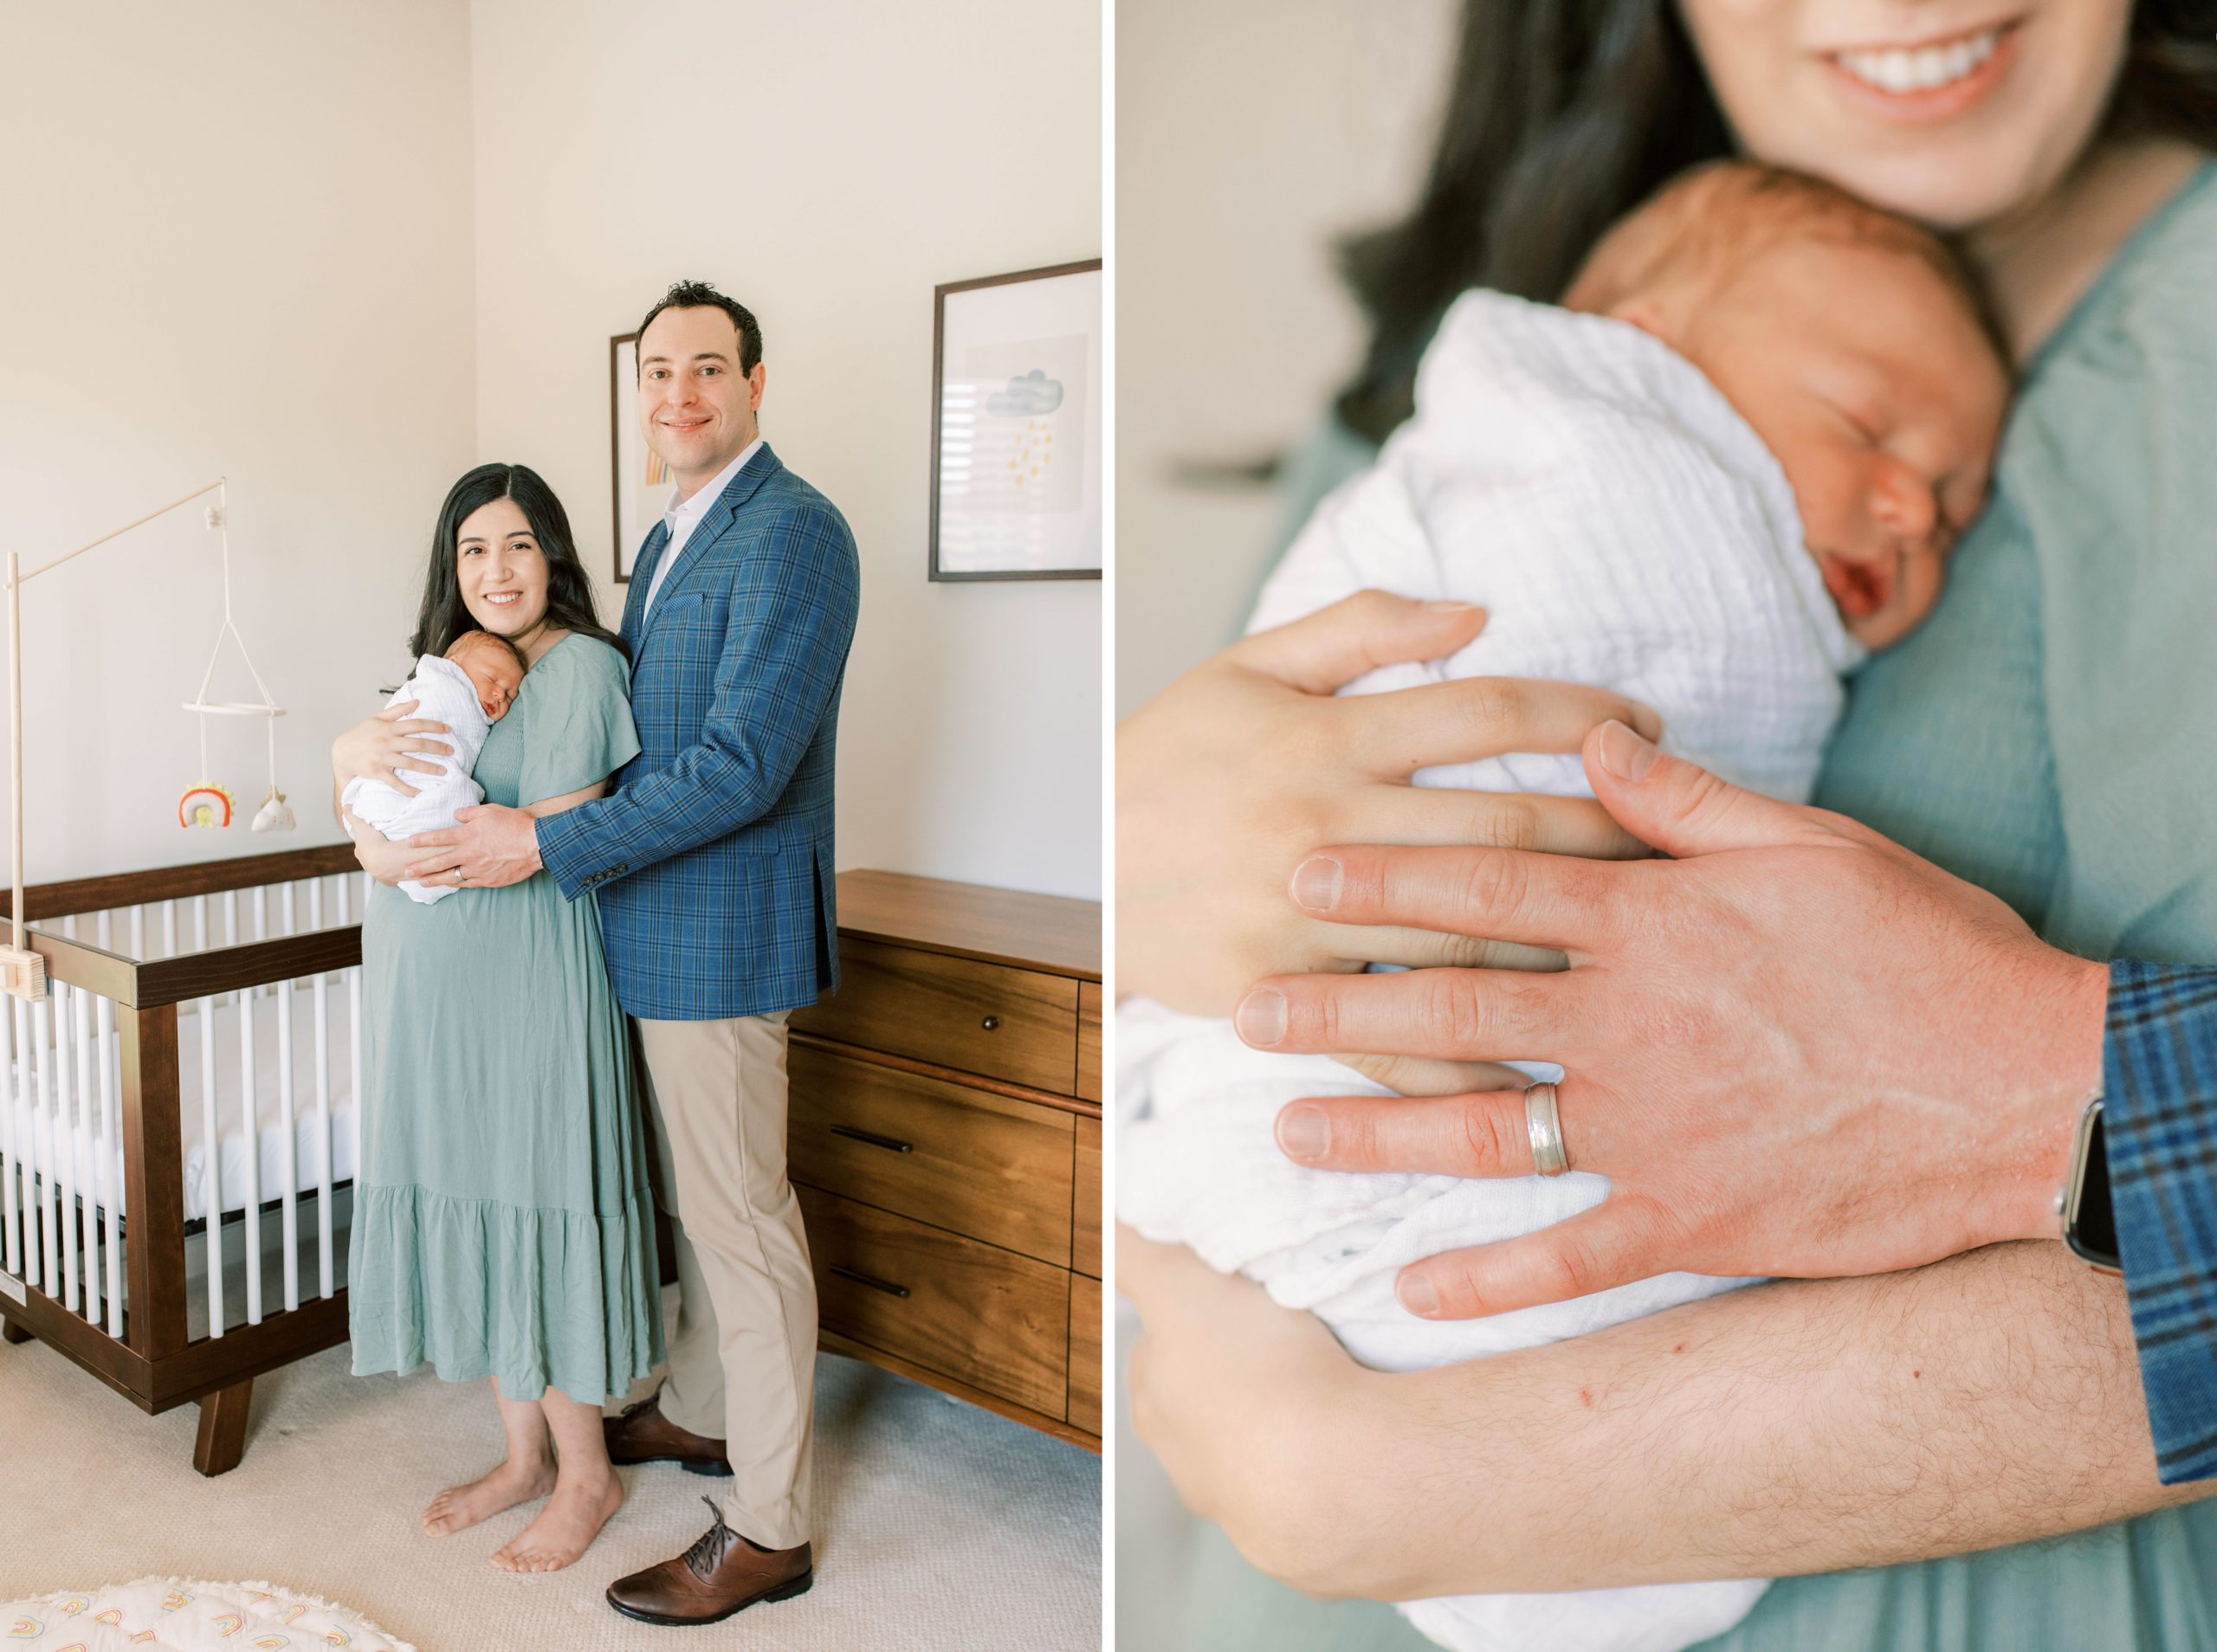 Washington, DC wedding photographer captures a newborn session for one of her past engagement and wedding couples.